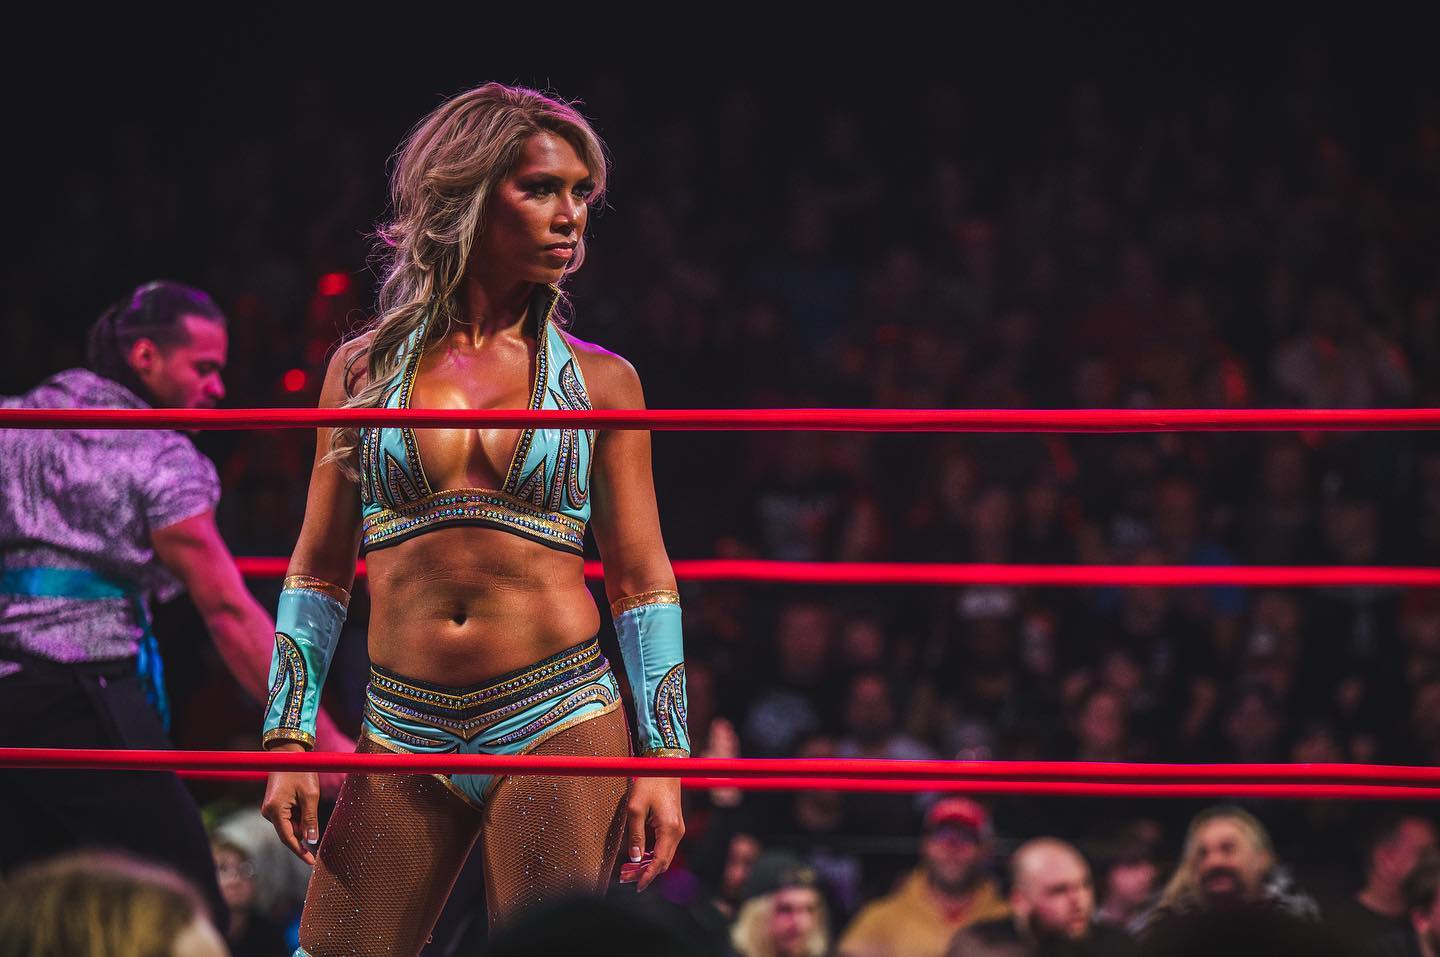 Gisele Shaw, a wrestler from Impact Wrestling, alleges that Rick Steiner went on a transphobic rant